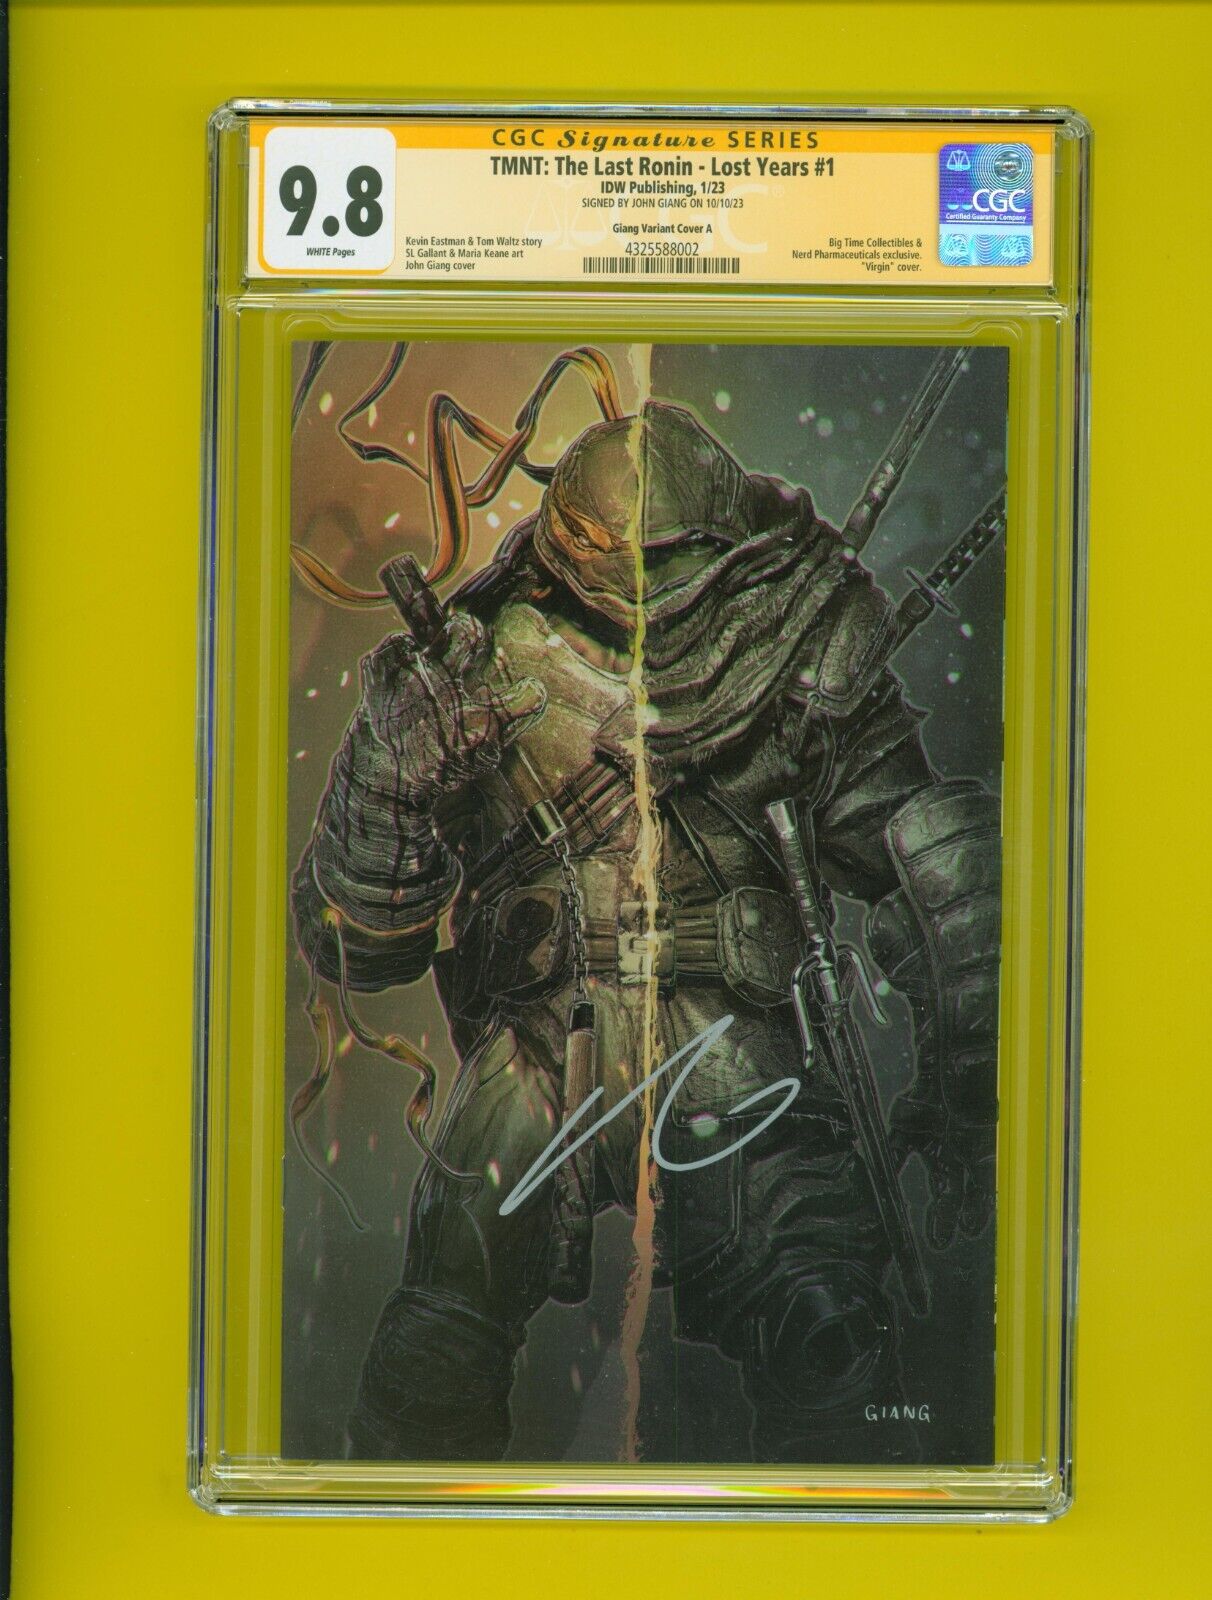 TMNT: THE LAST RONIN - LOST YEARS #1 CGC 9.8 SS-virgin variant-signed John Giang